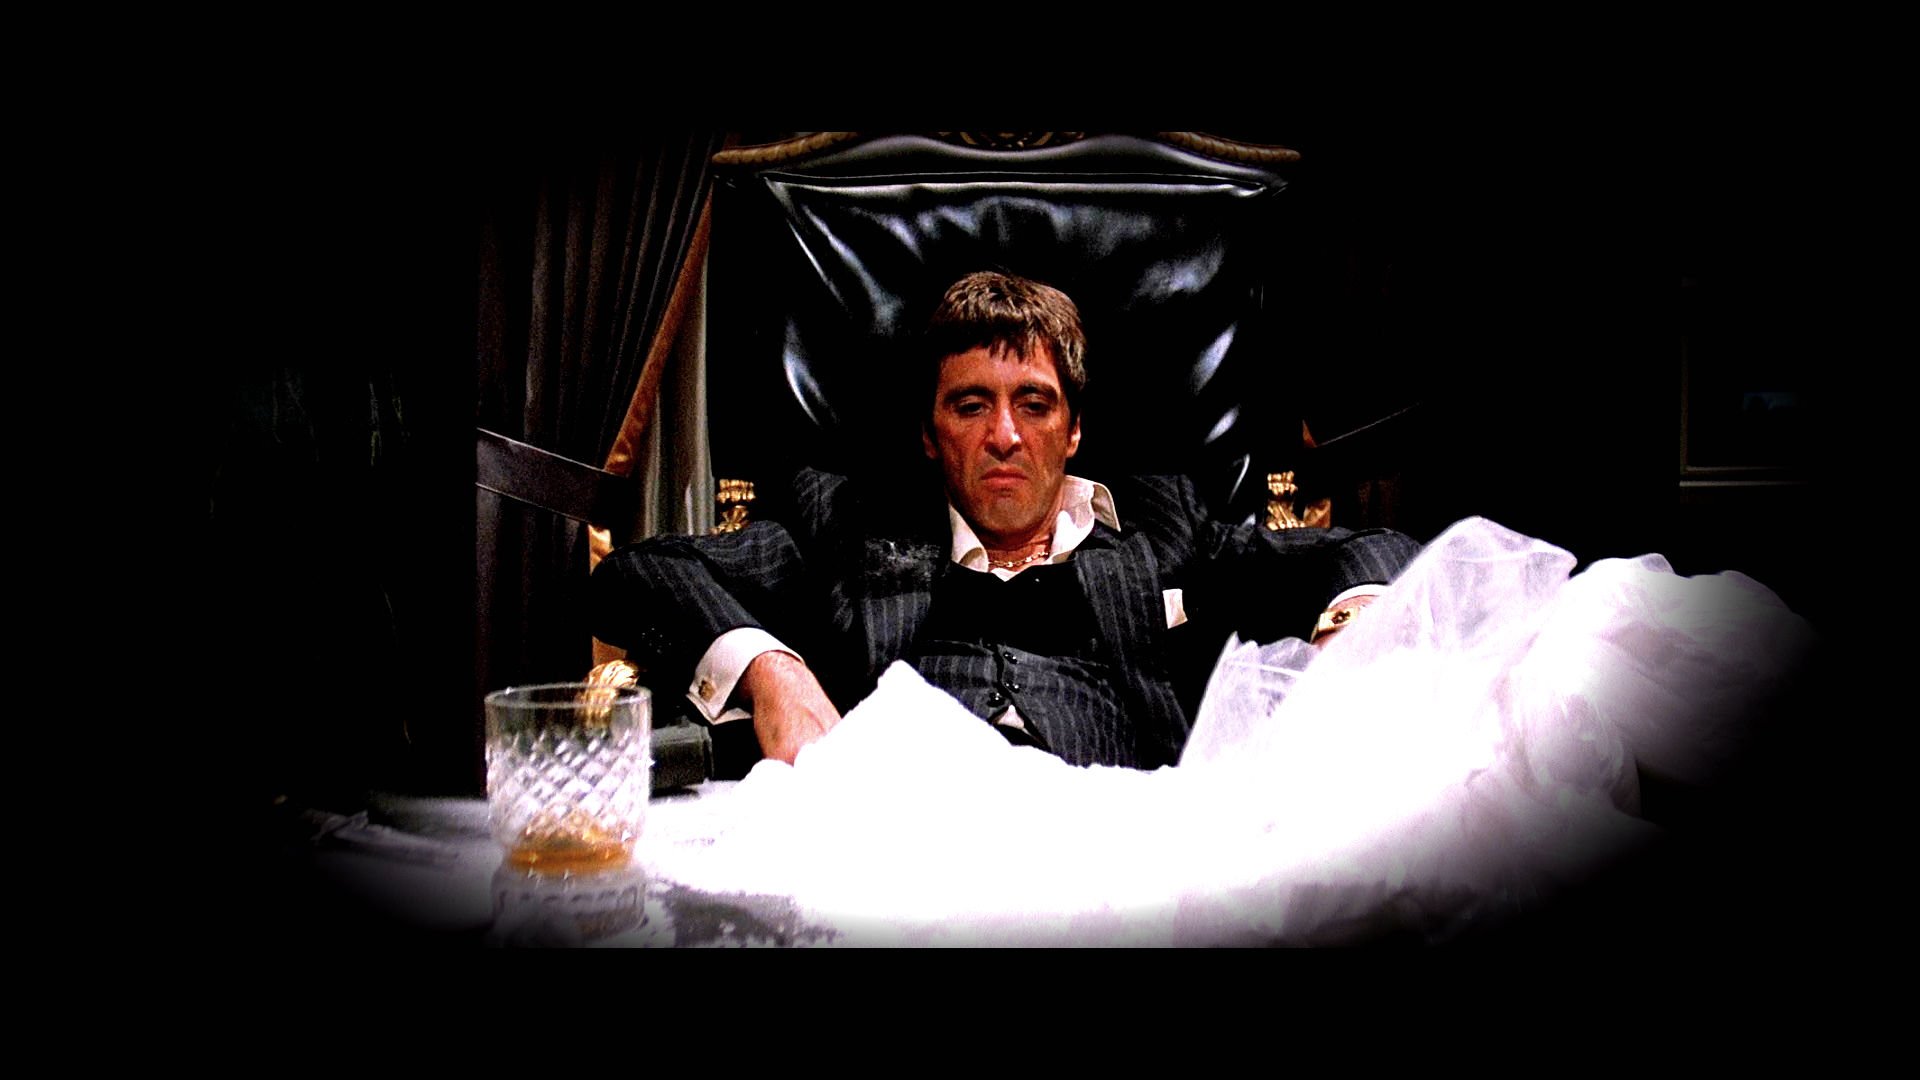 Tony Montana Wallpaper For The iPhone And Ipod Touch